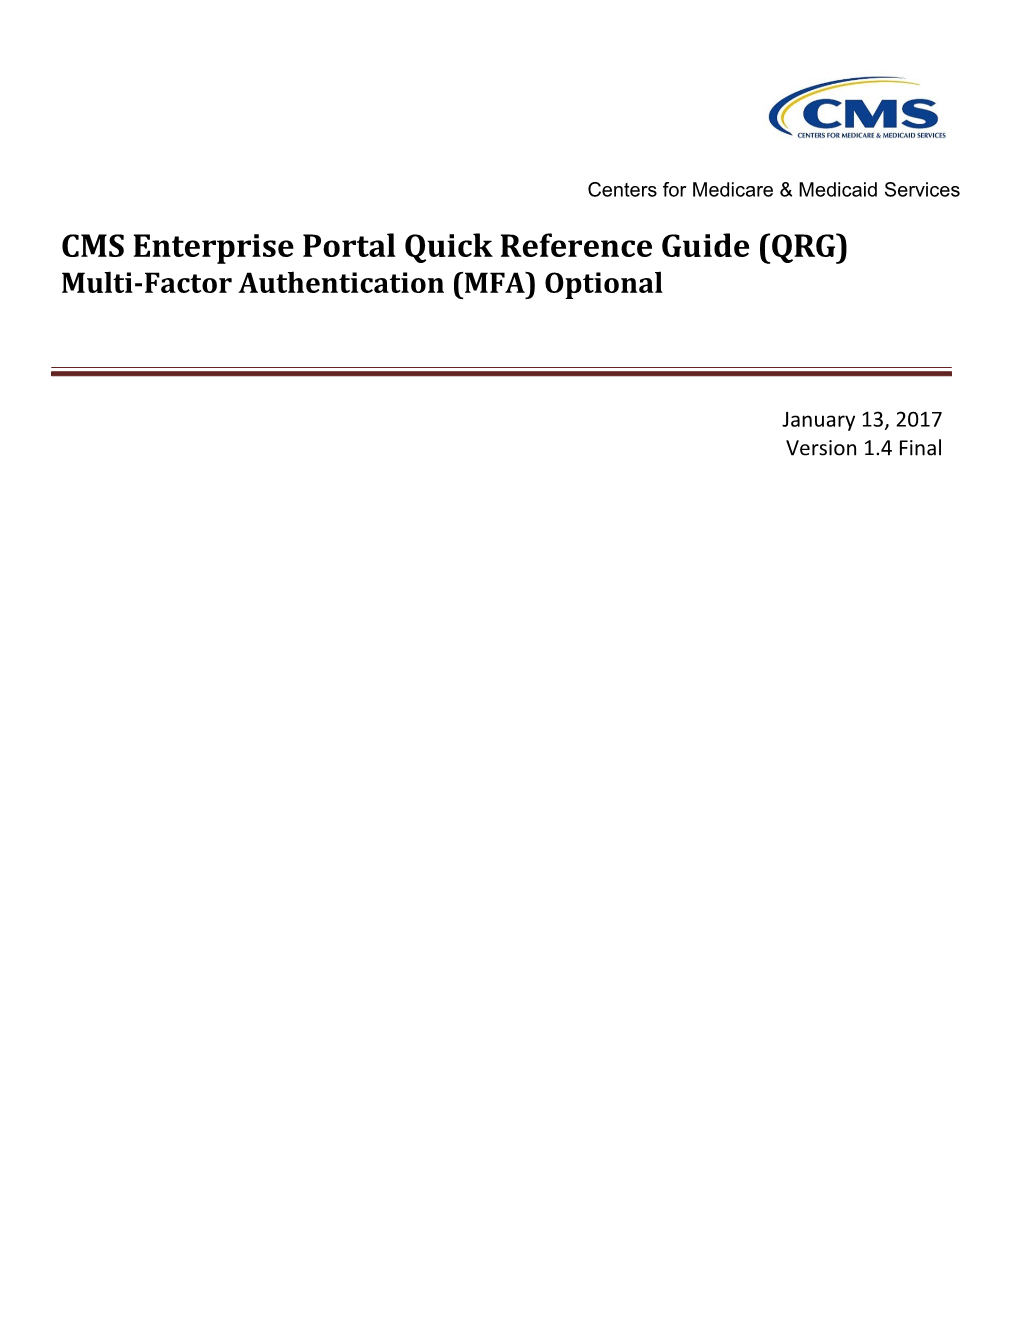 EIDM Quick Reference Guide - Multi-Factor Authentication (MFA) Optional